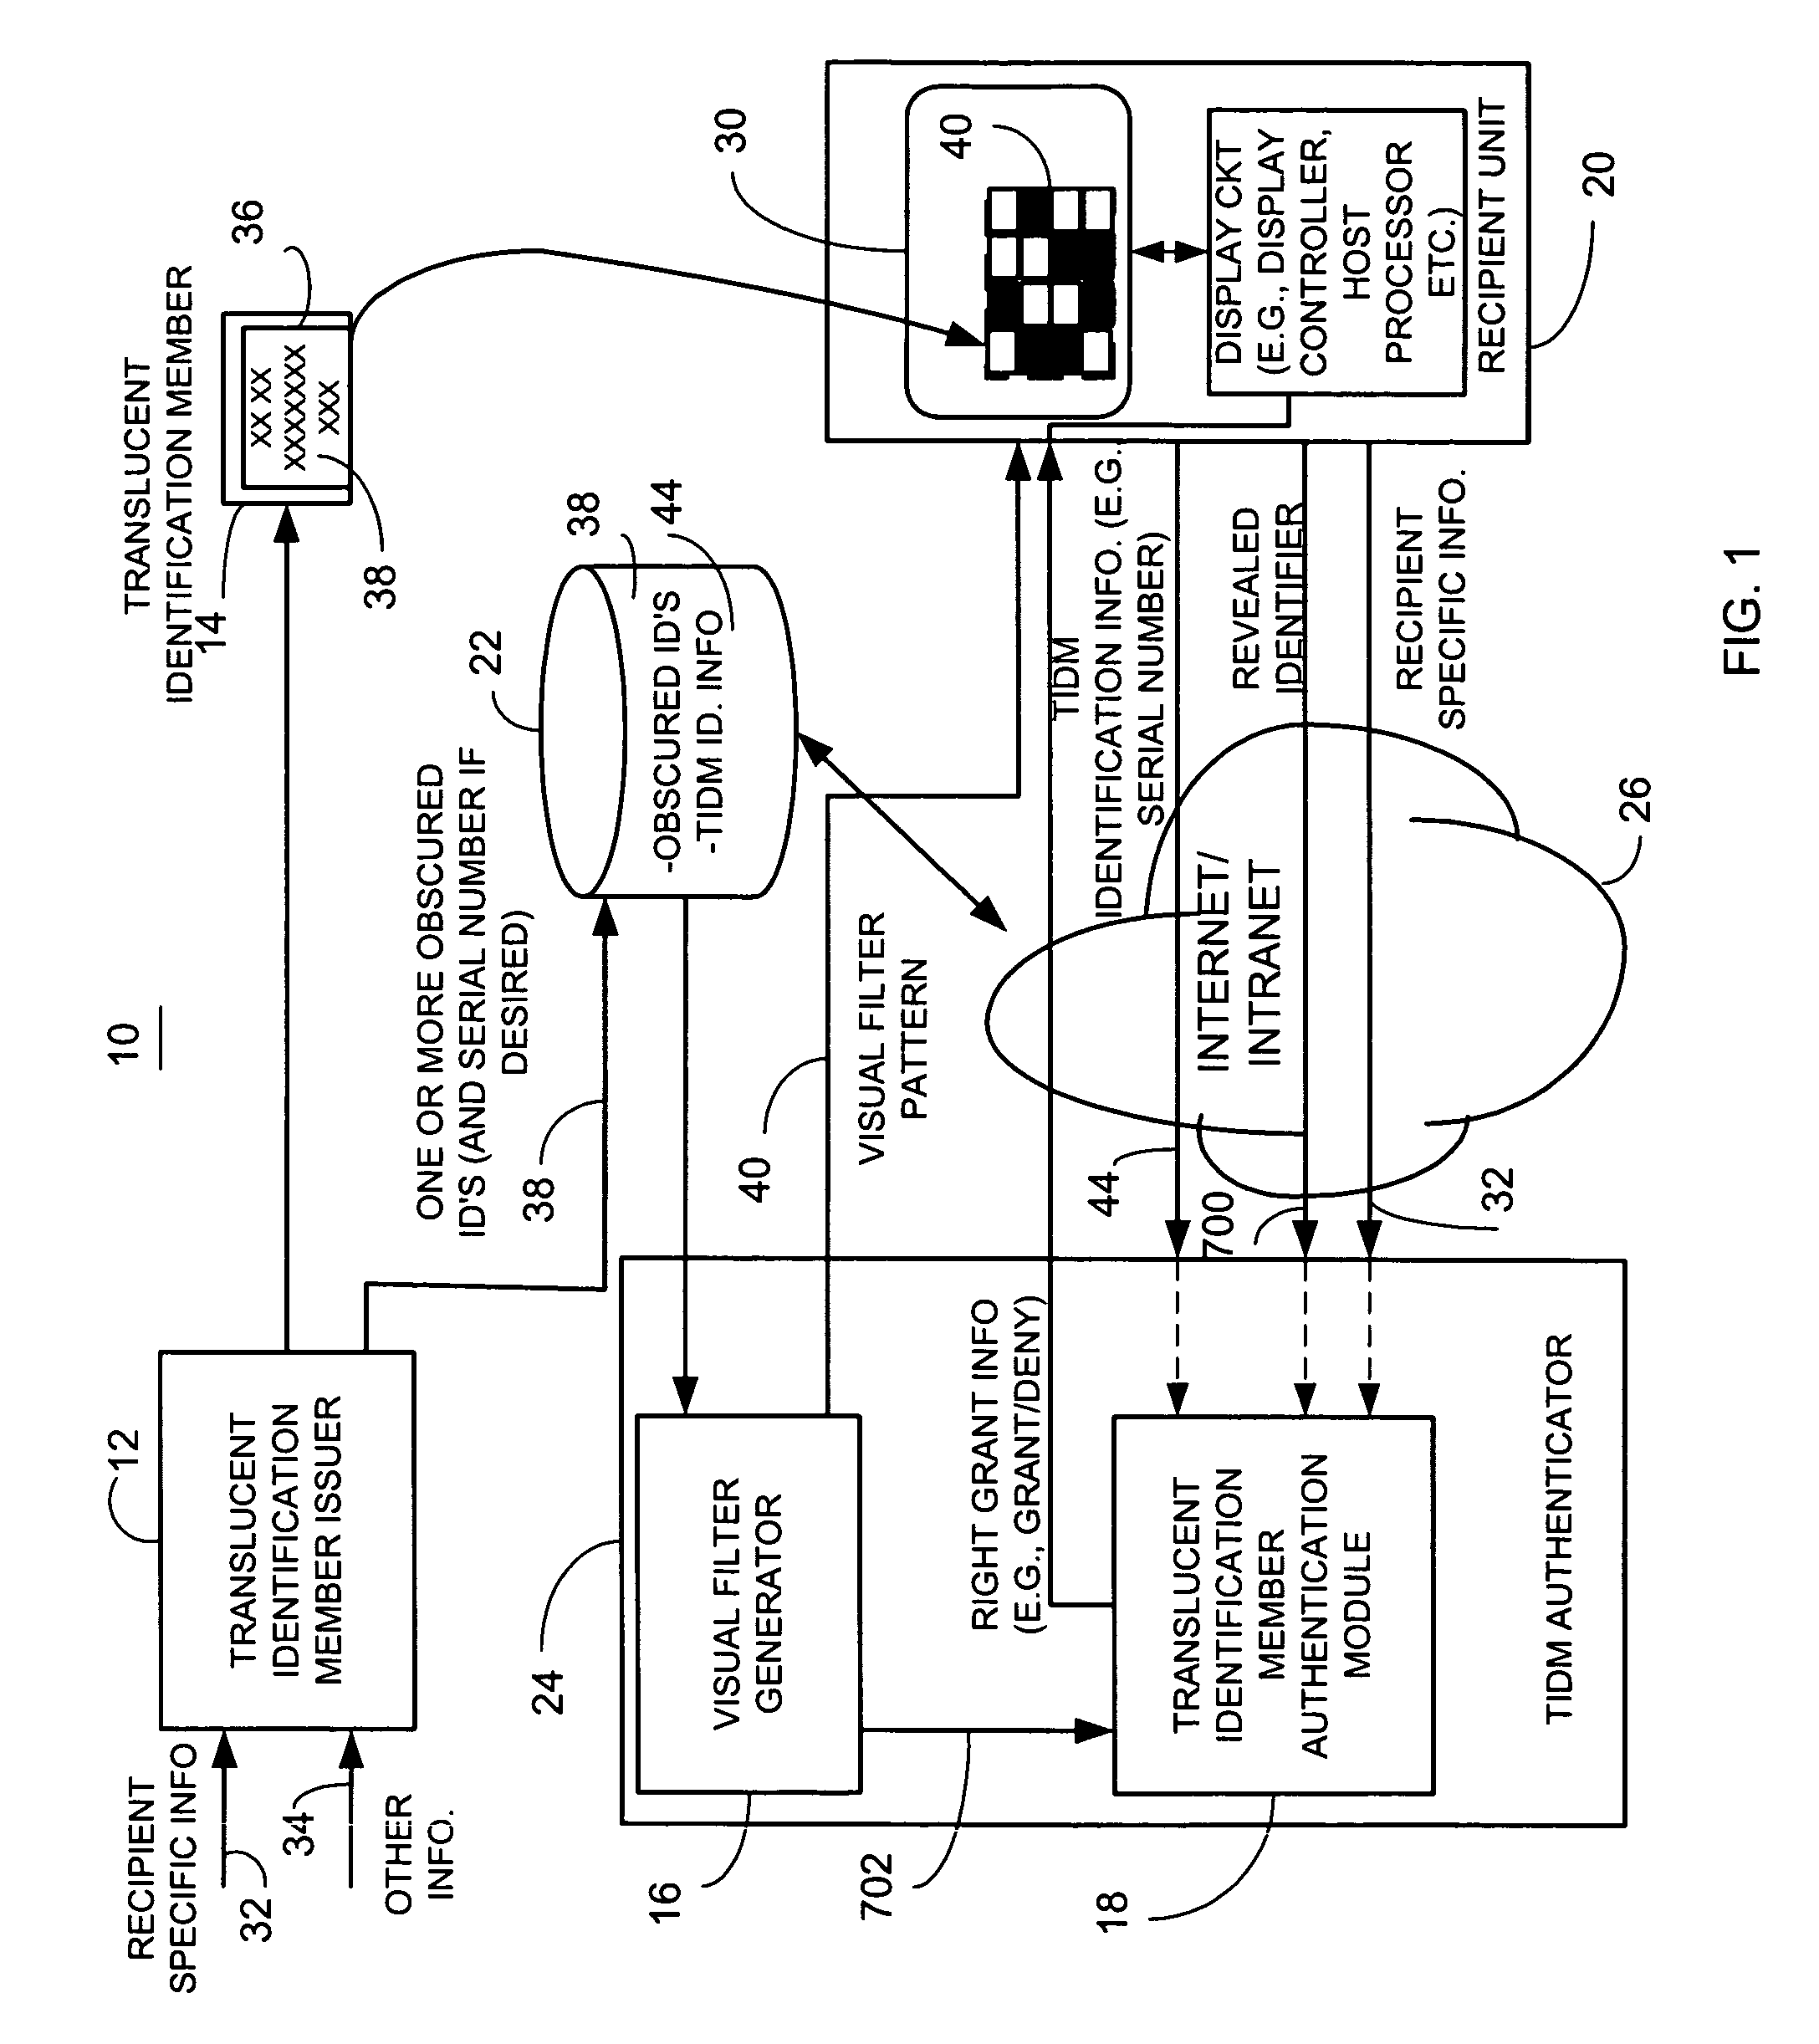 Method and apparatus for providing electronic message authentication